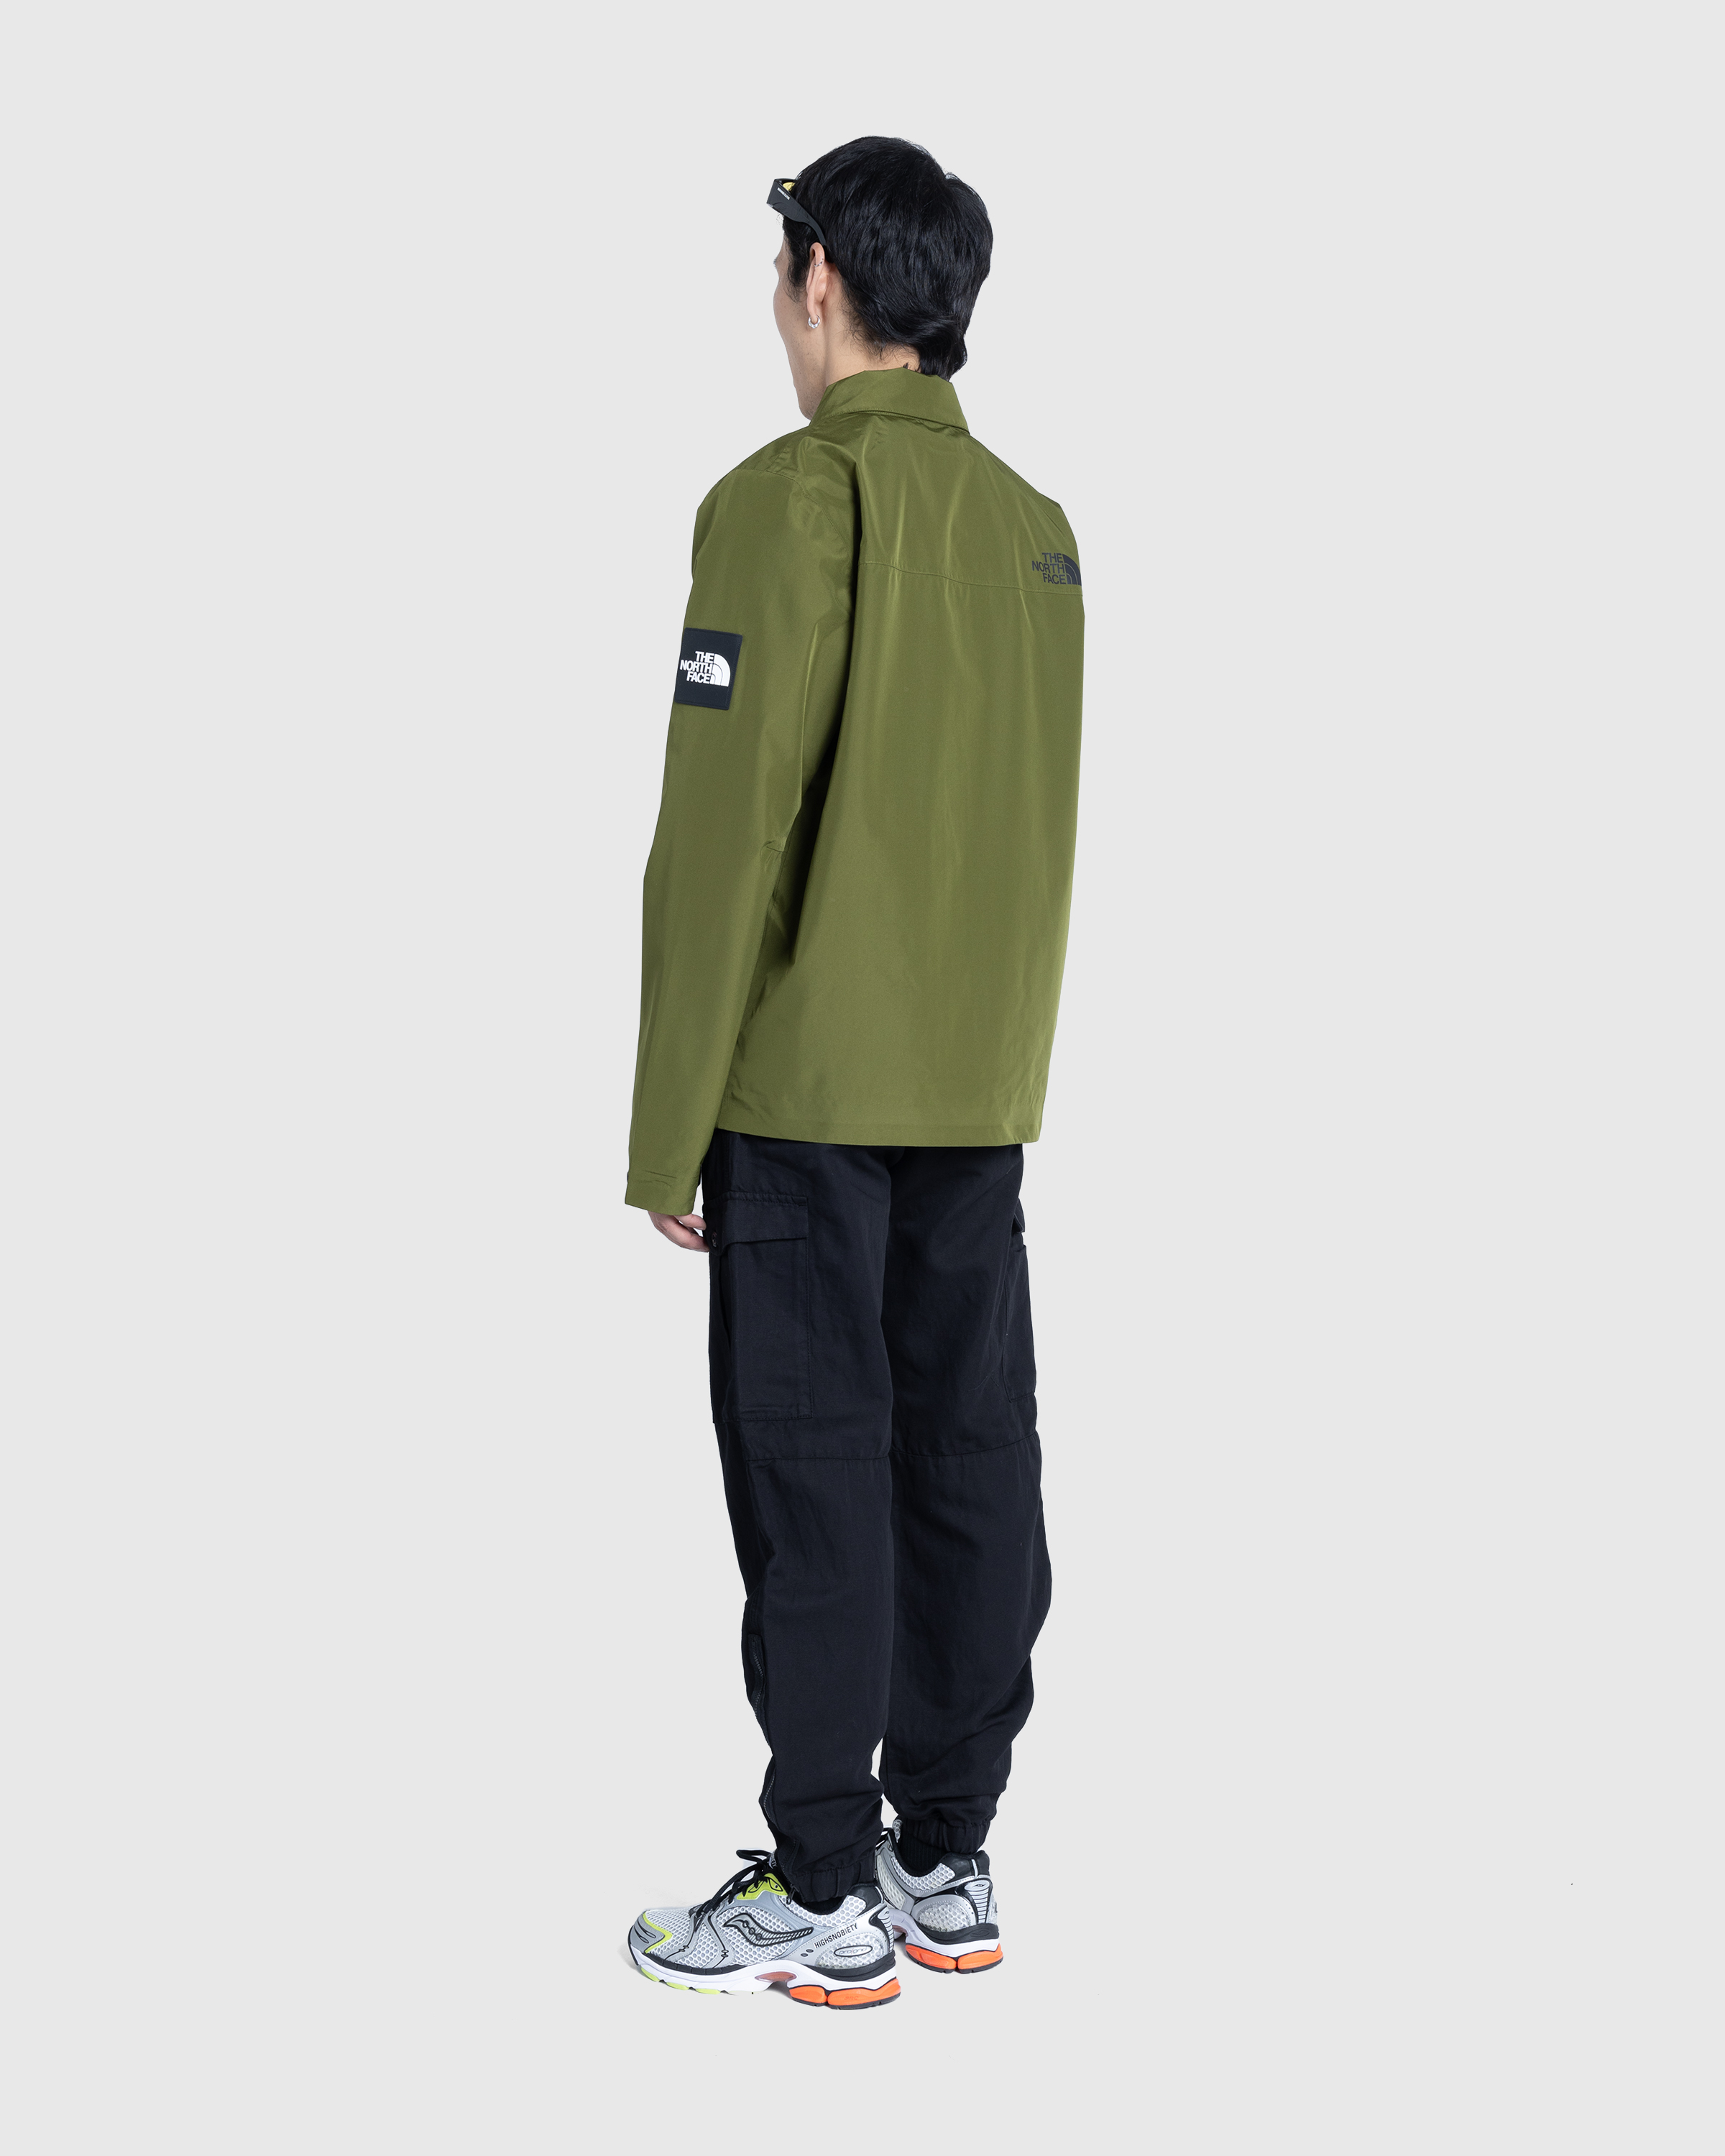 The North Face – Amos Tech Overshirt Forest Olive - Overshirt - Green - Image 4